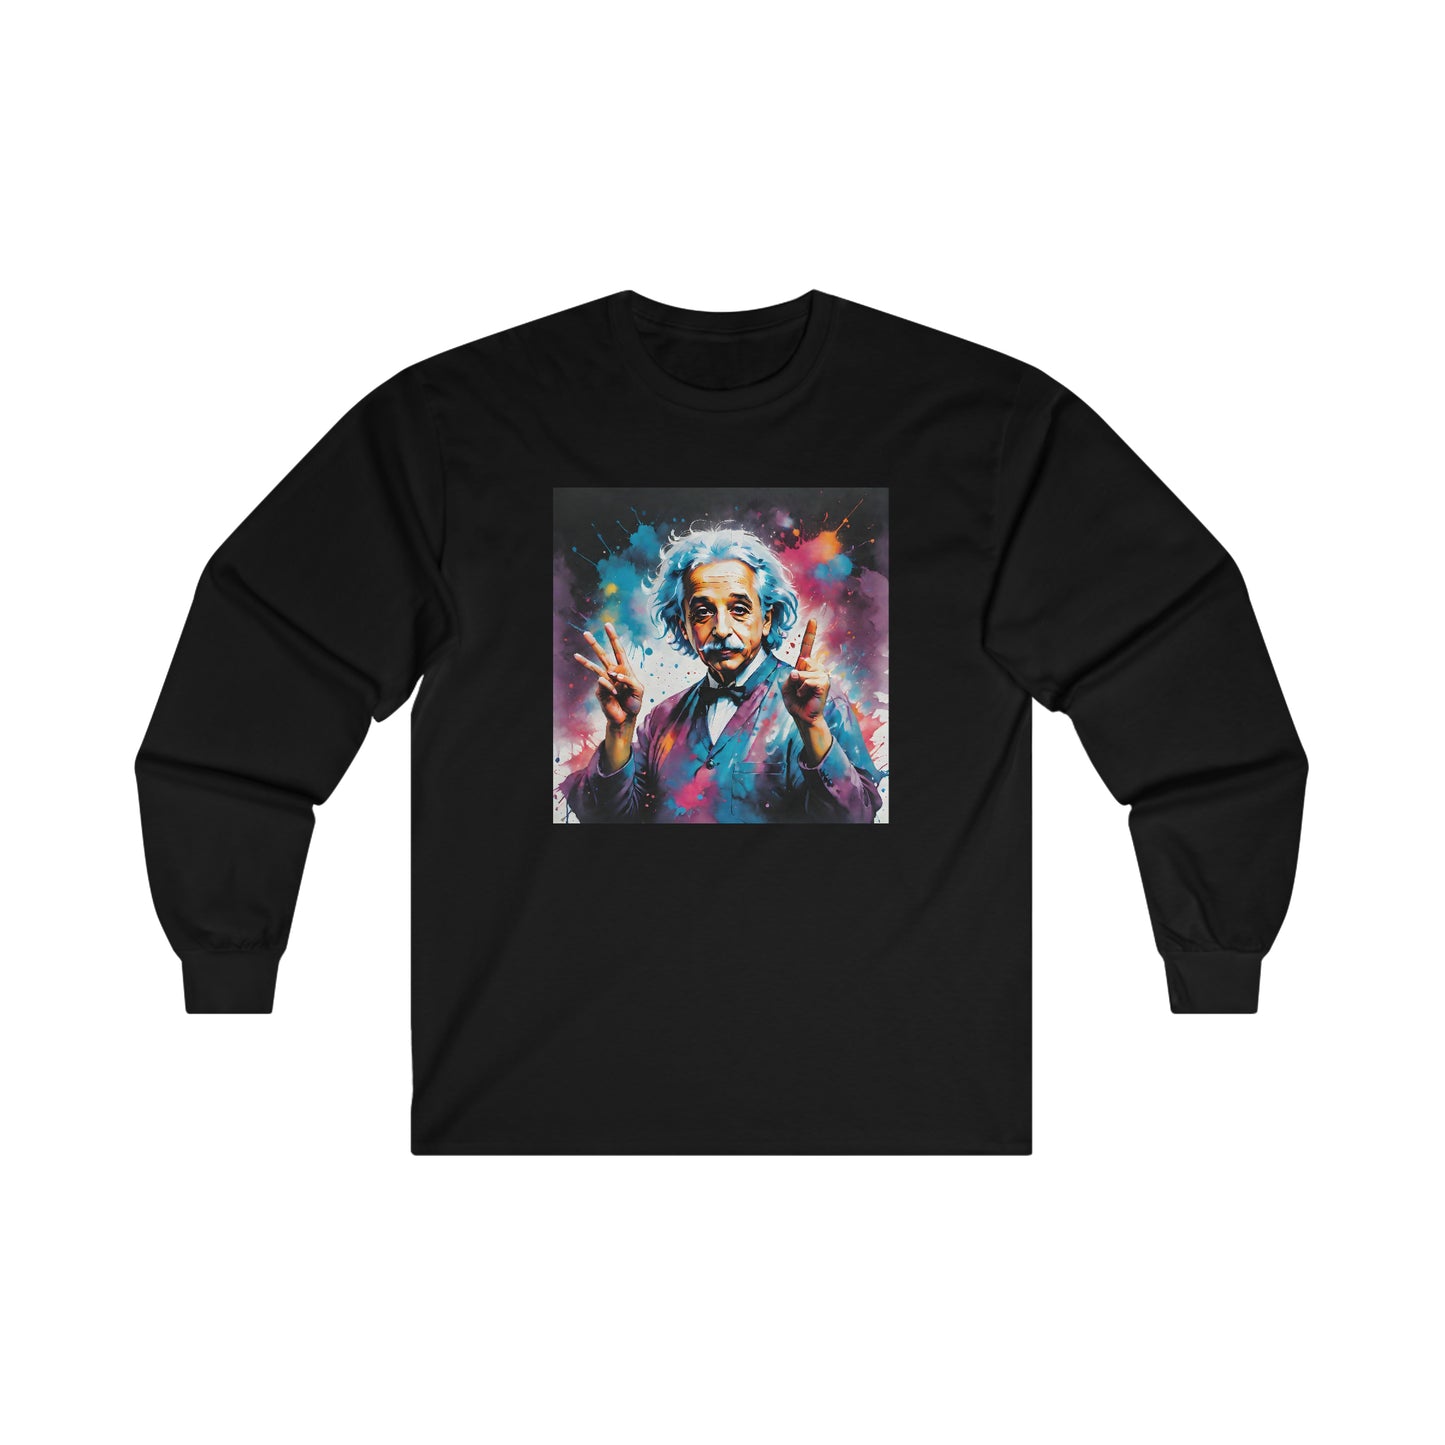 "The theory of everything" Single Print Ultra Cotton Long Sleeve Tee